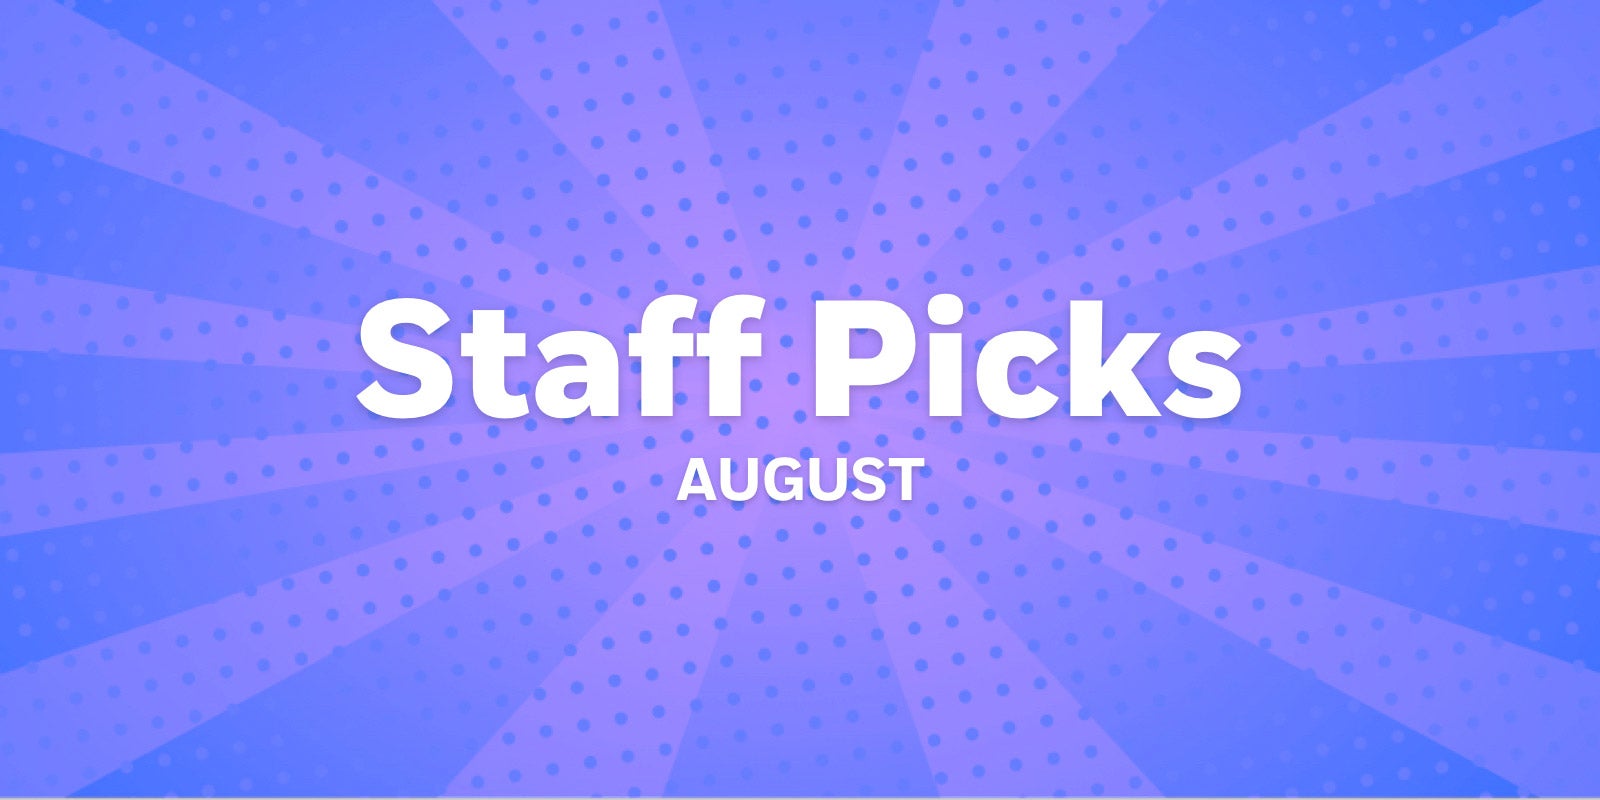 Staff Picks for August 2021